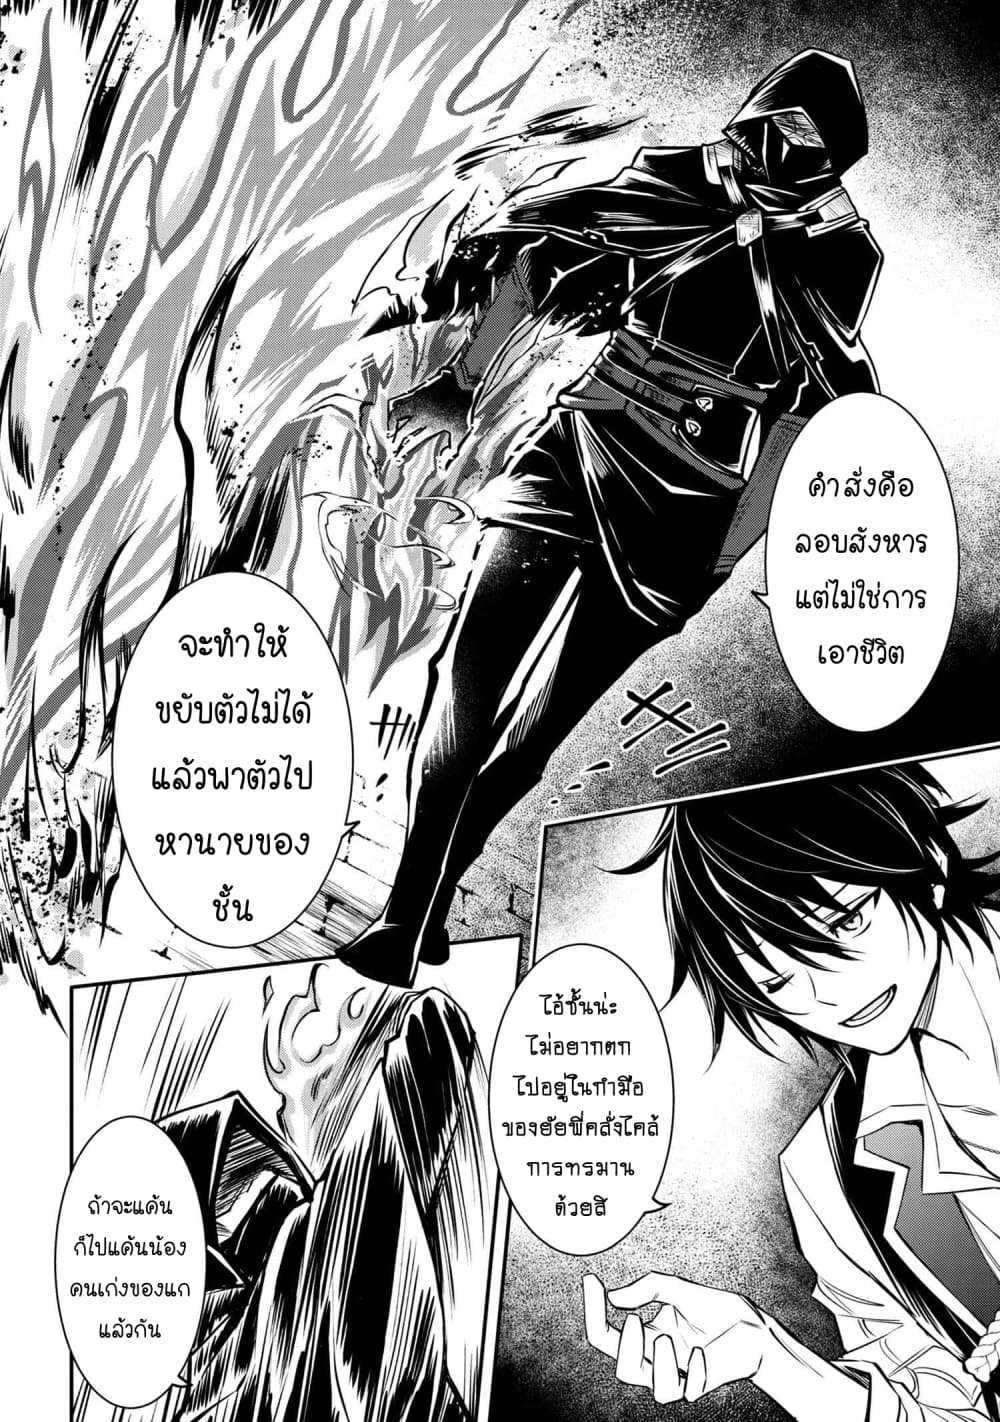 The Strongest Dull Princeรขโฌโขs Secret Battle for the Throne 21. 2 (8)